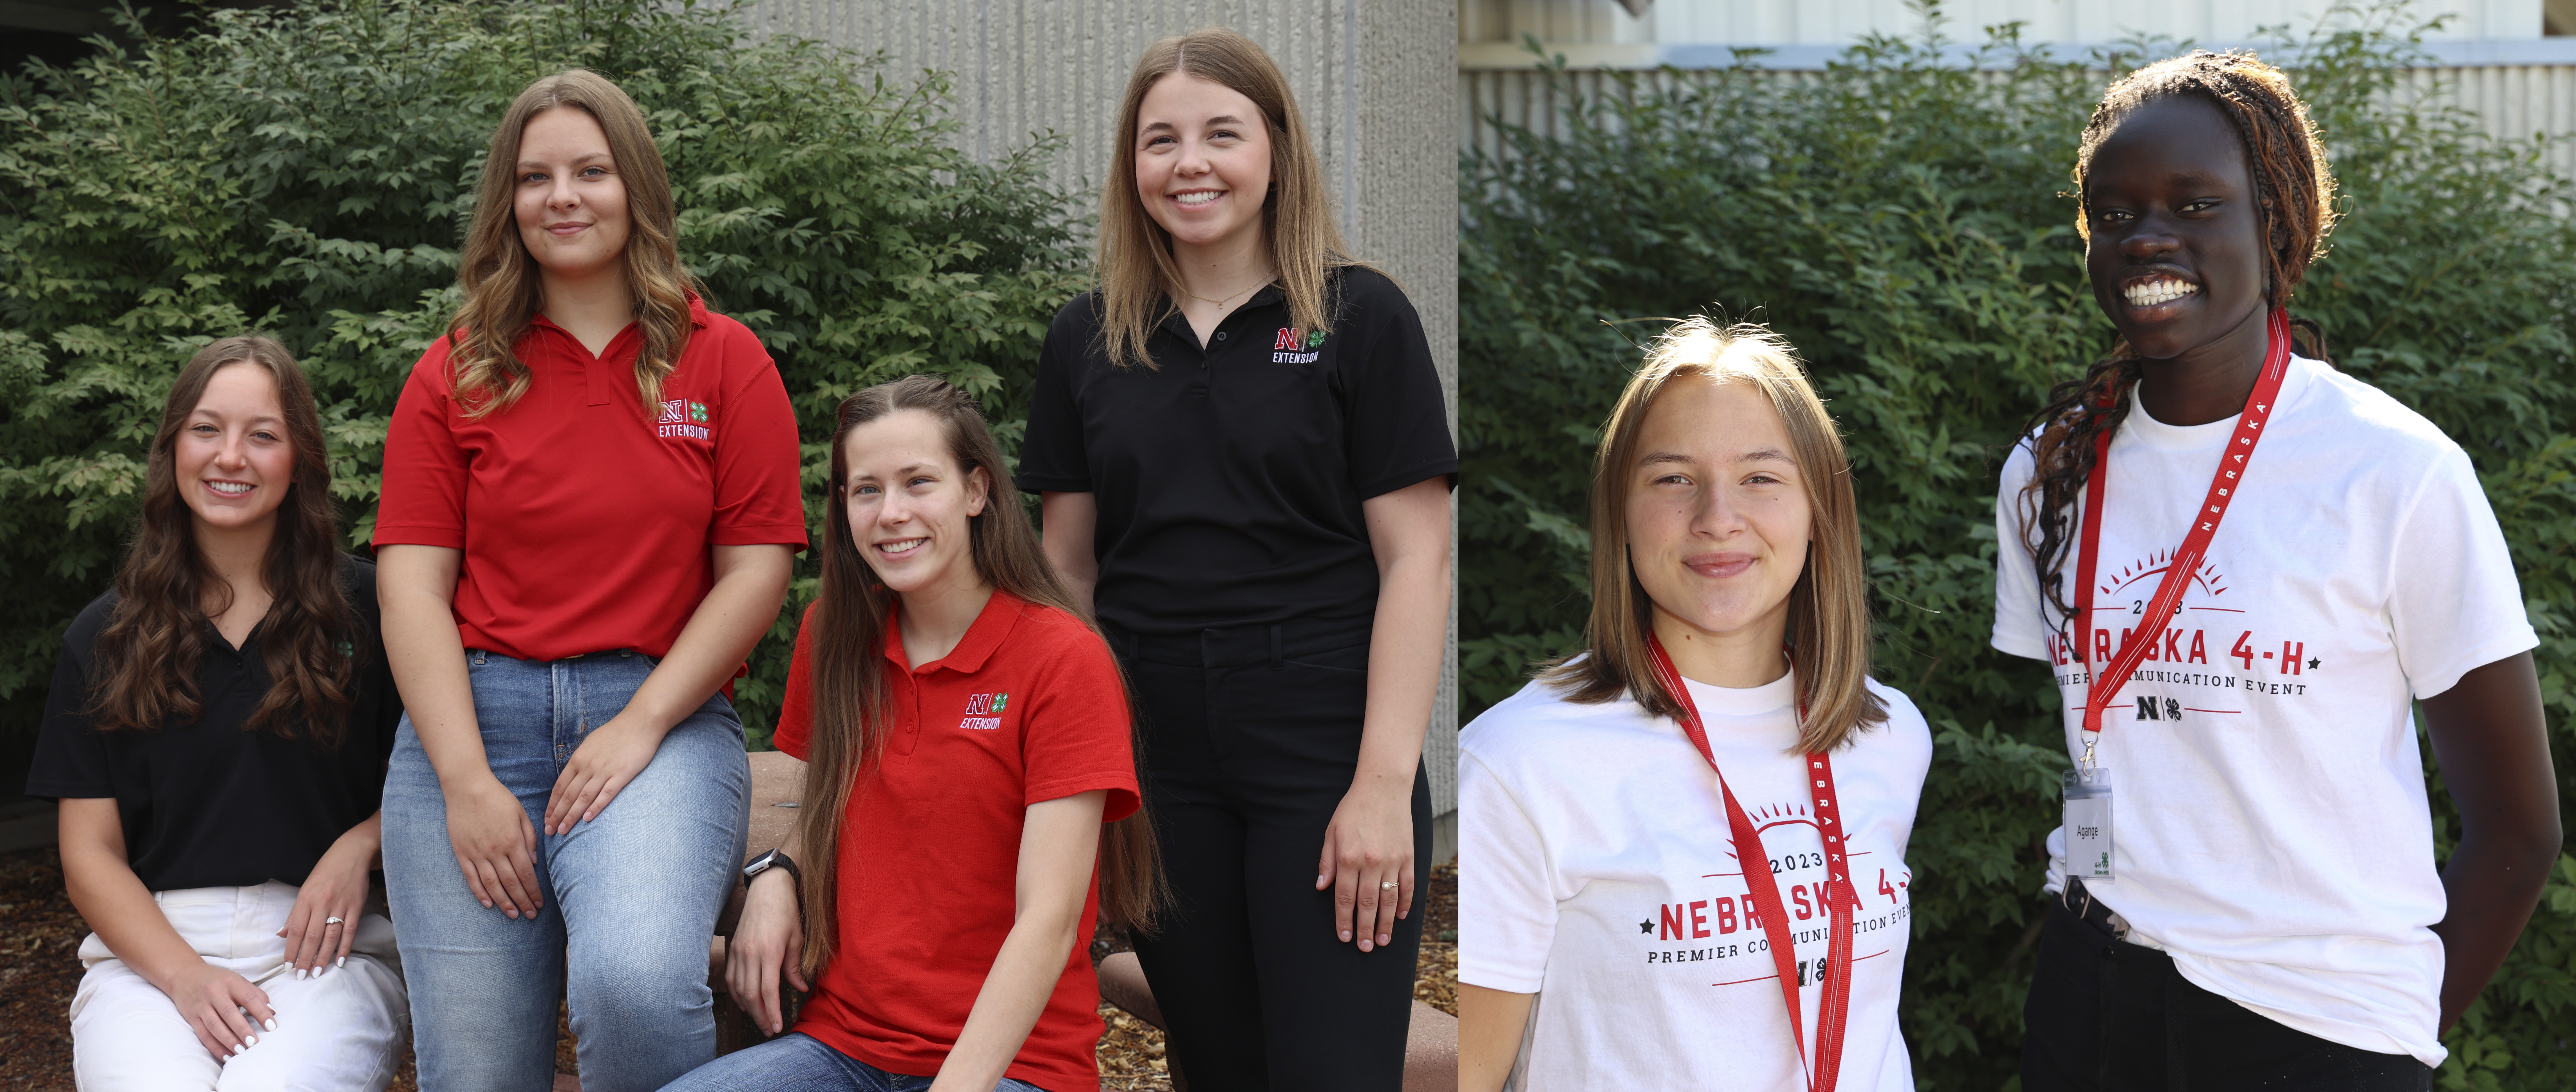 Extension interns (left photo L–R): Rayley Fankhauser, Jacie Pelikan, Breanna Gilmore and Cameryn Brandt. Teen interns (right photo L–R): Kallie Vance and Agange Alwir.